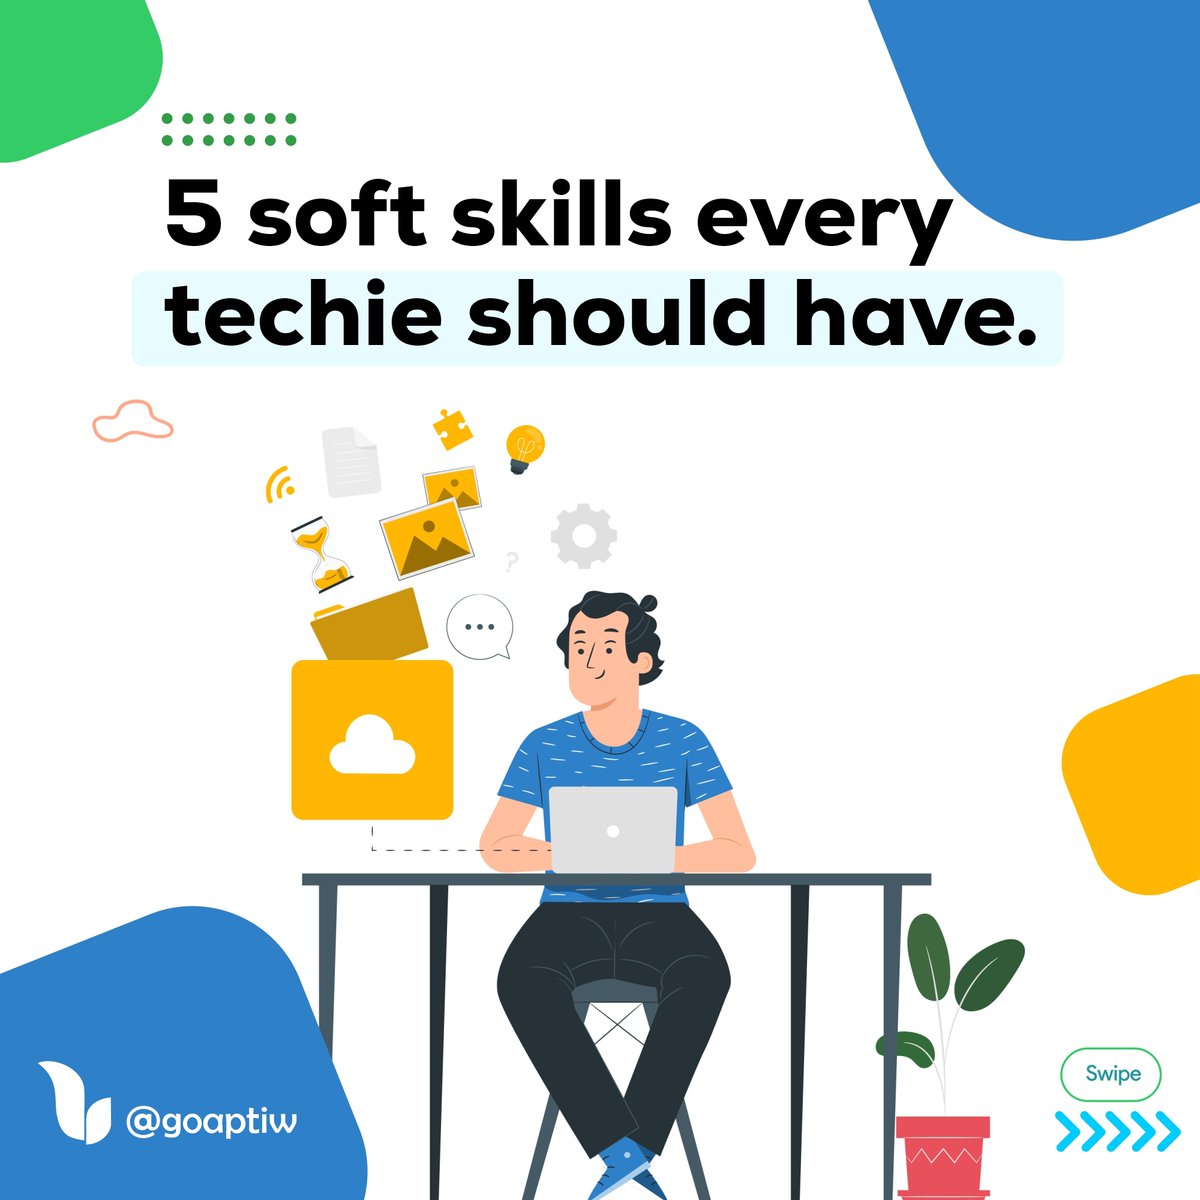 Working in tech requires a lot and with these soft skills, you will be well on your way to working effectively. What other soft skills would you need to further enhance your productivity?

#softskills #tech #goaptiw #saas #techies